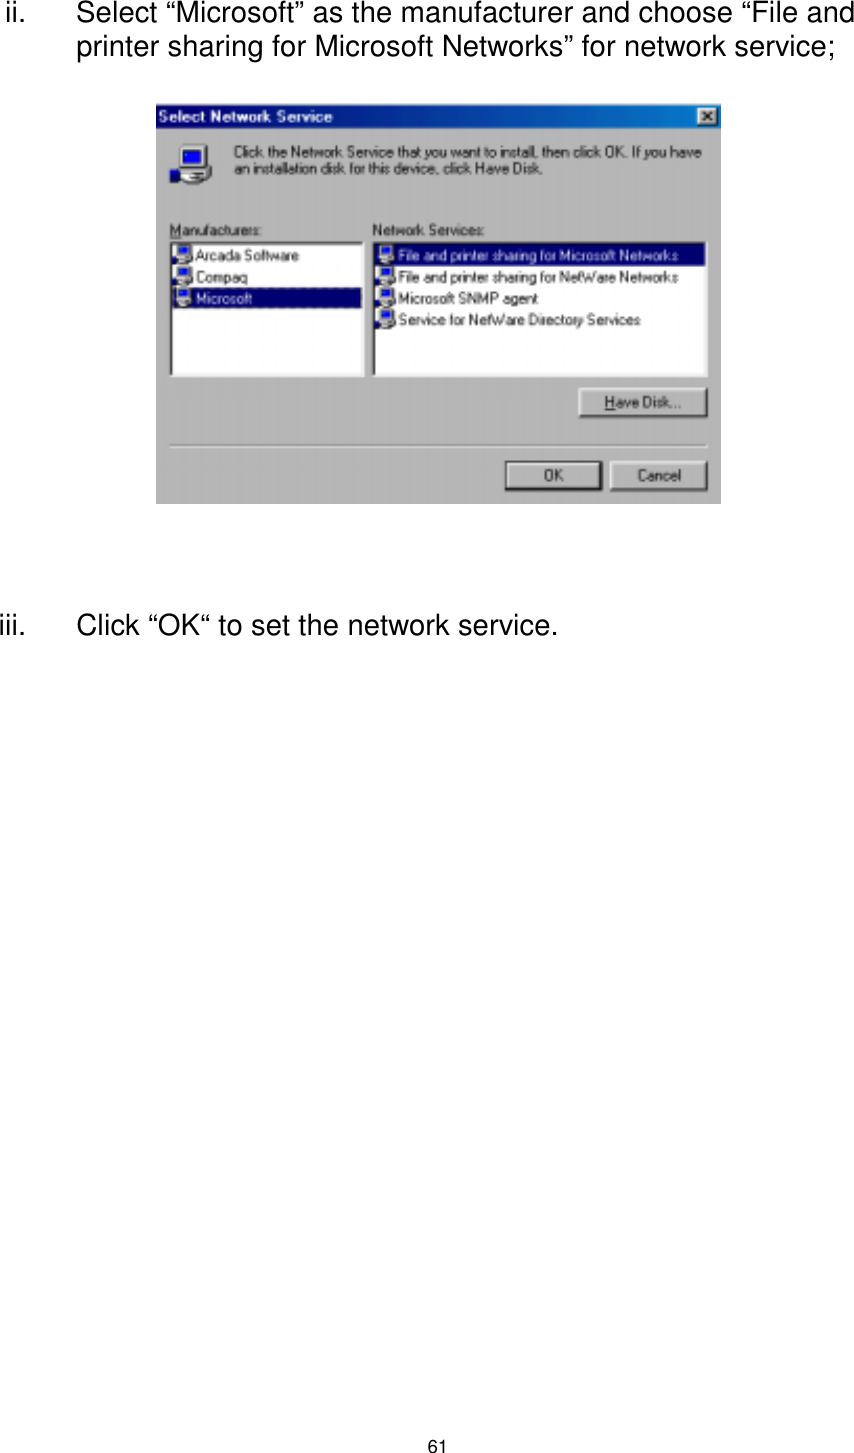  61  ii.  Select “Microsoft” as the manufacturer and choose “File and printer sharing for Microsoft Networks” for network service;   iii.  Click “OK“ to set the network service. 